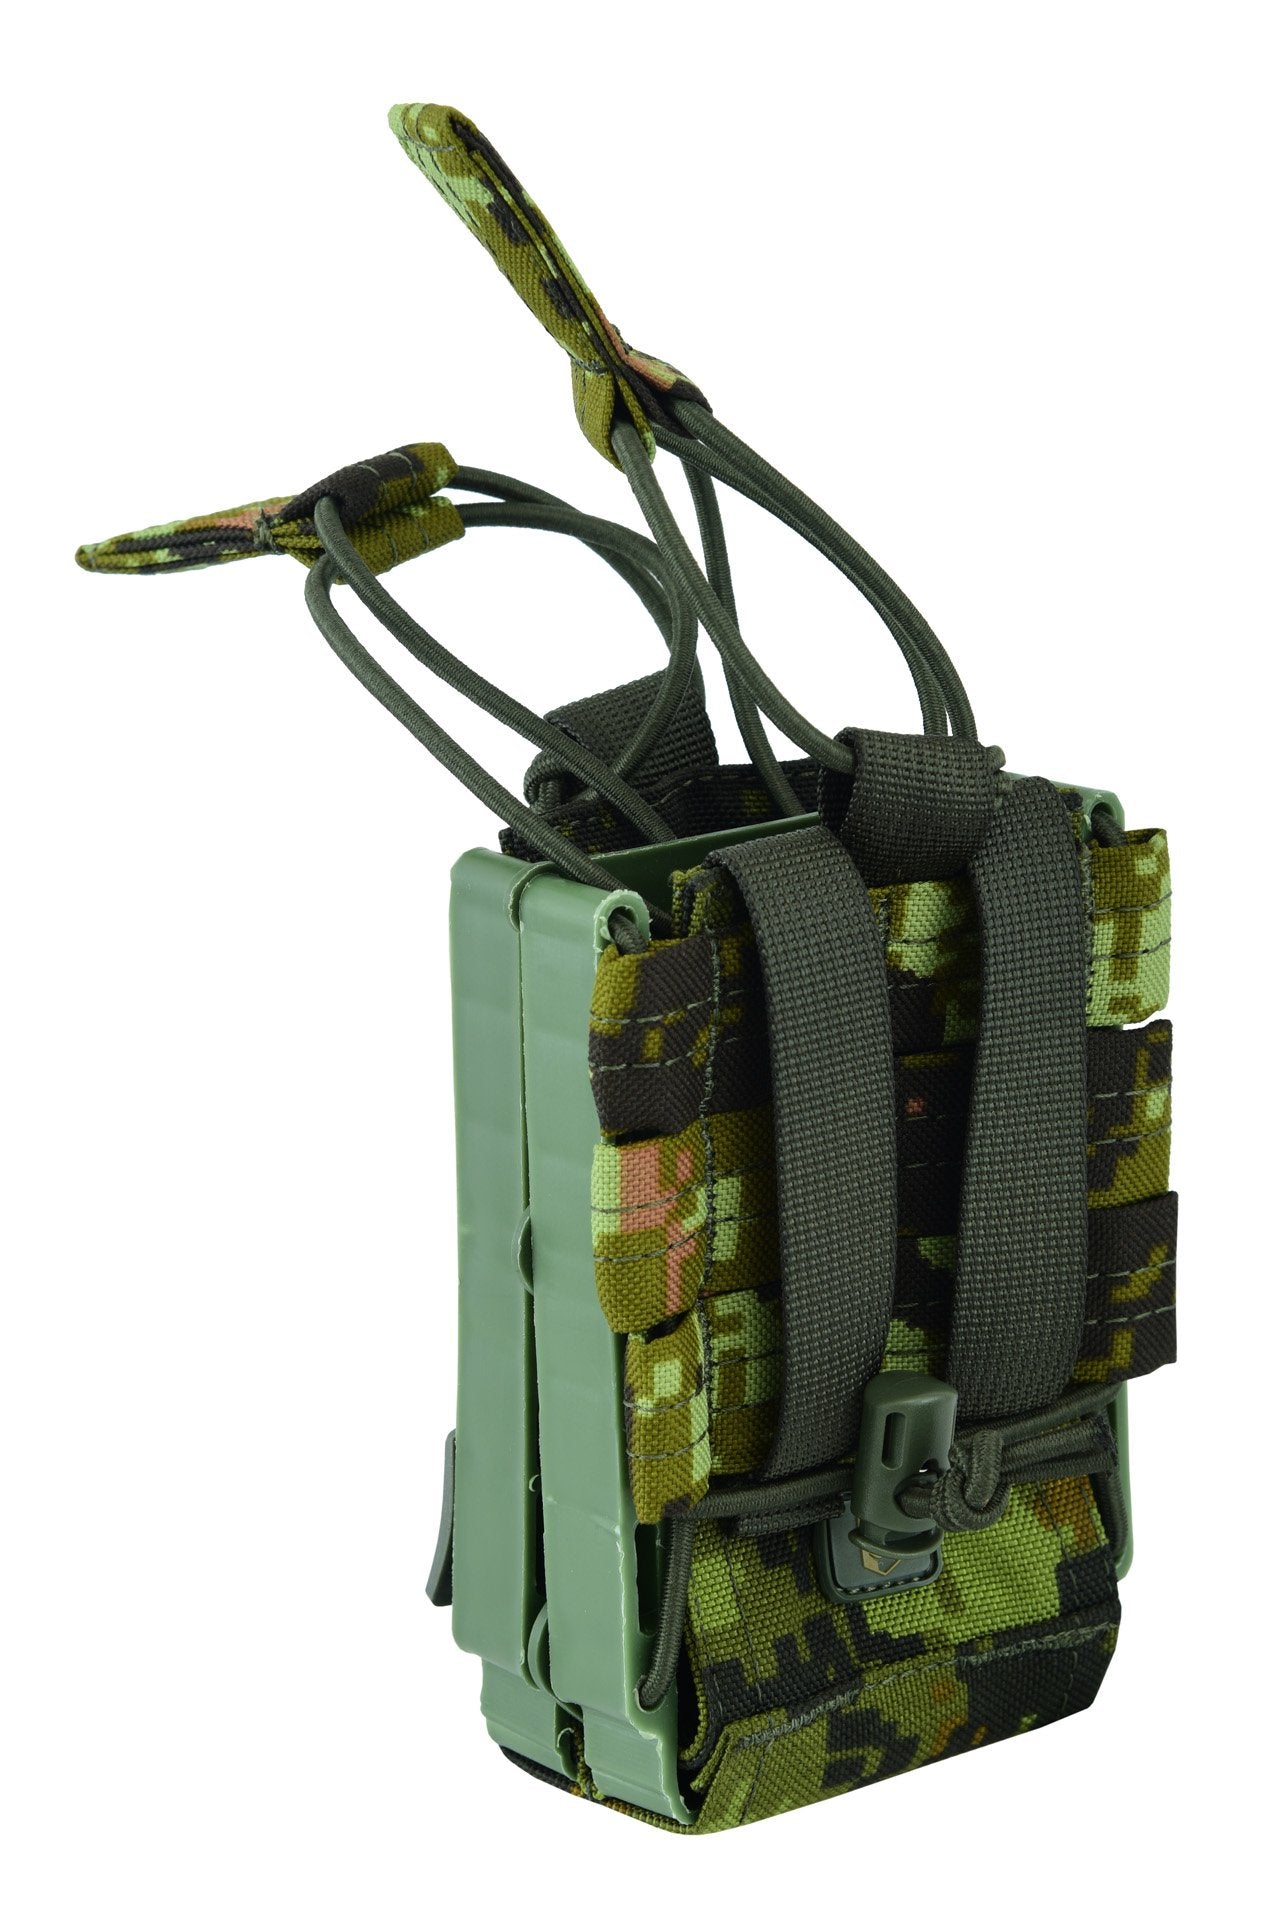 SHE-21020 Rapid Access Double Rifle Magazine Pouch CADPAT